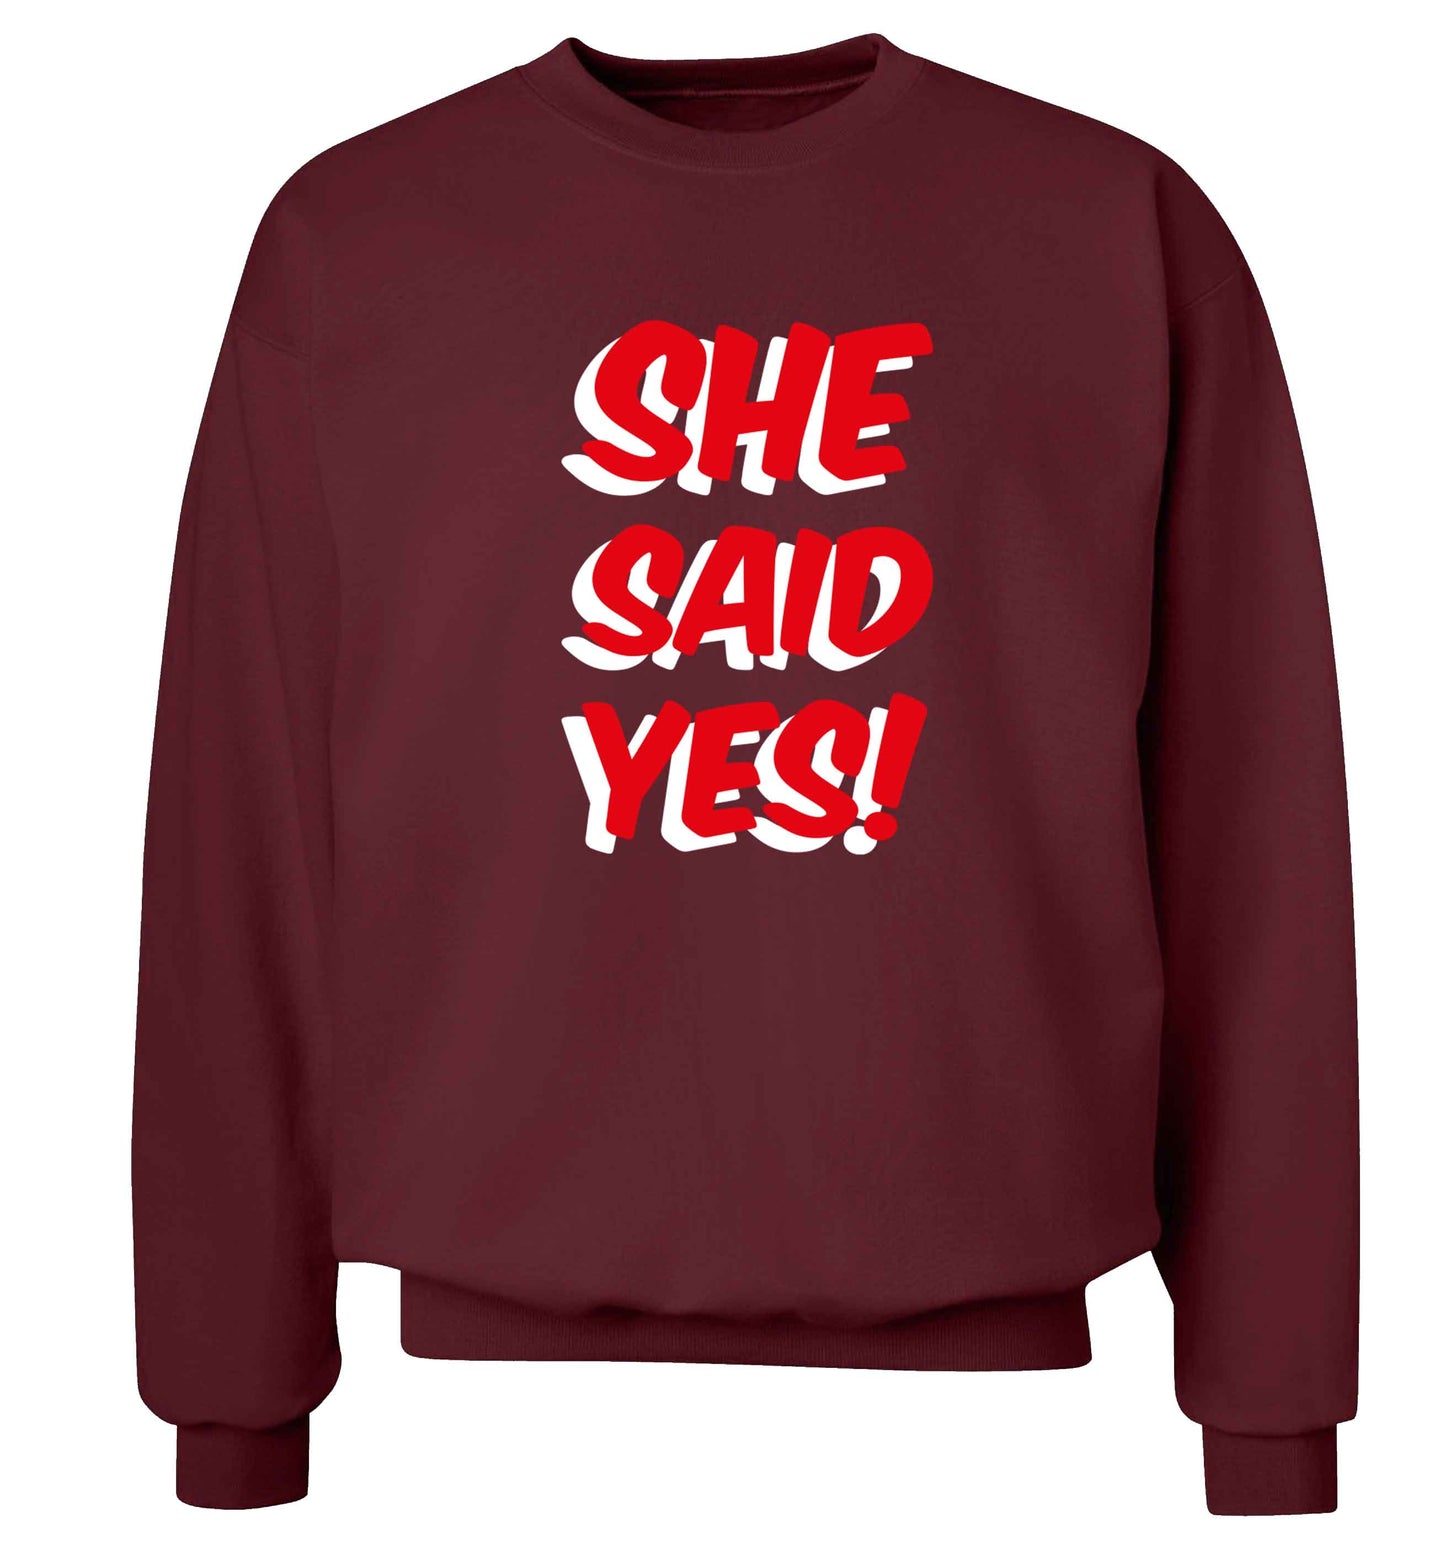 She said yes adult's unisex maroon sweater 2XL